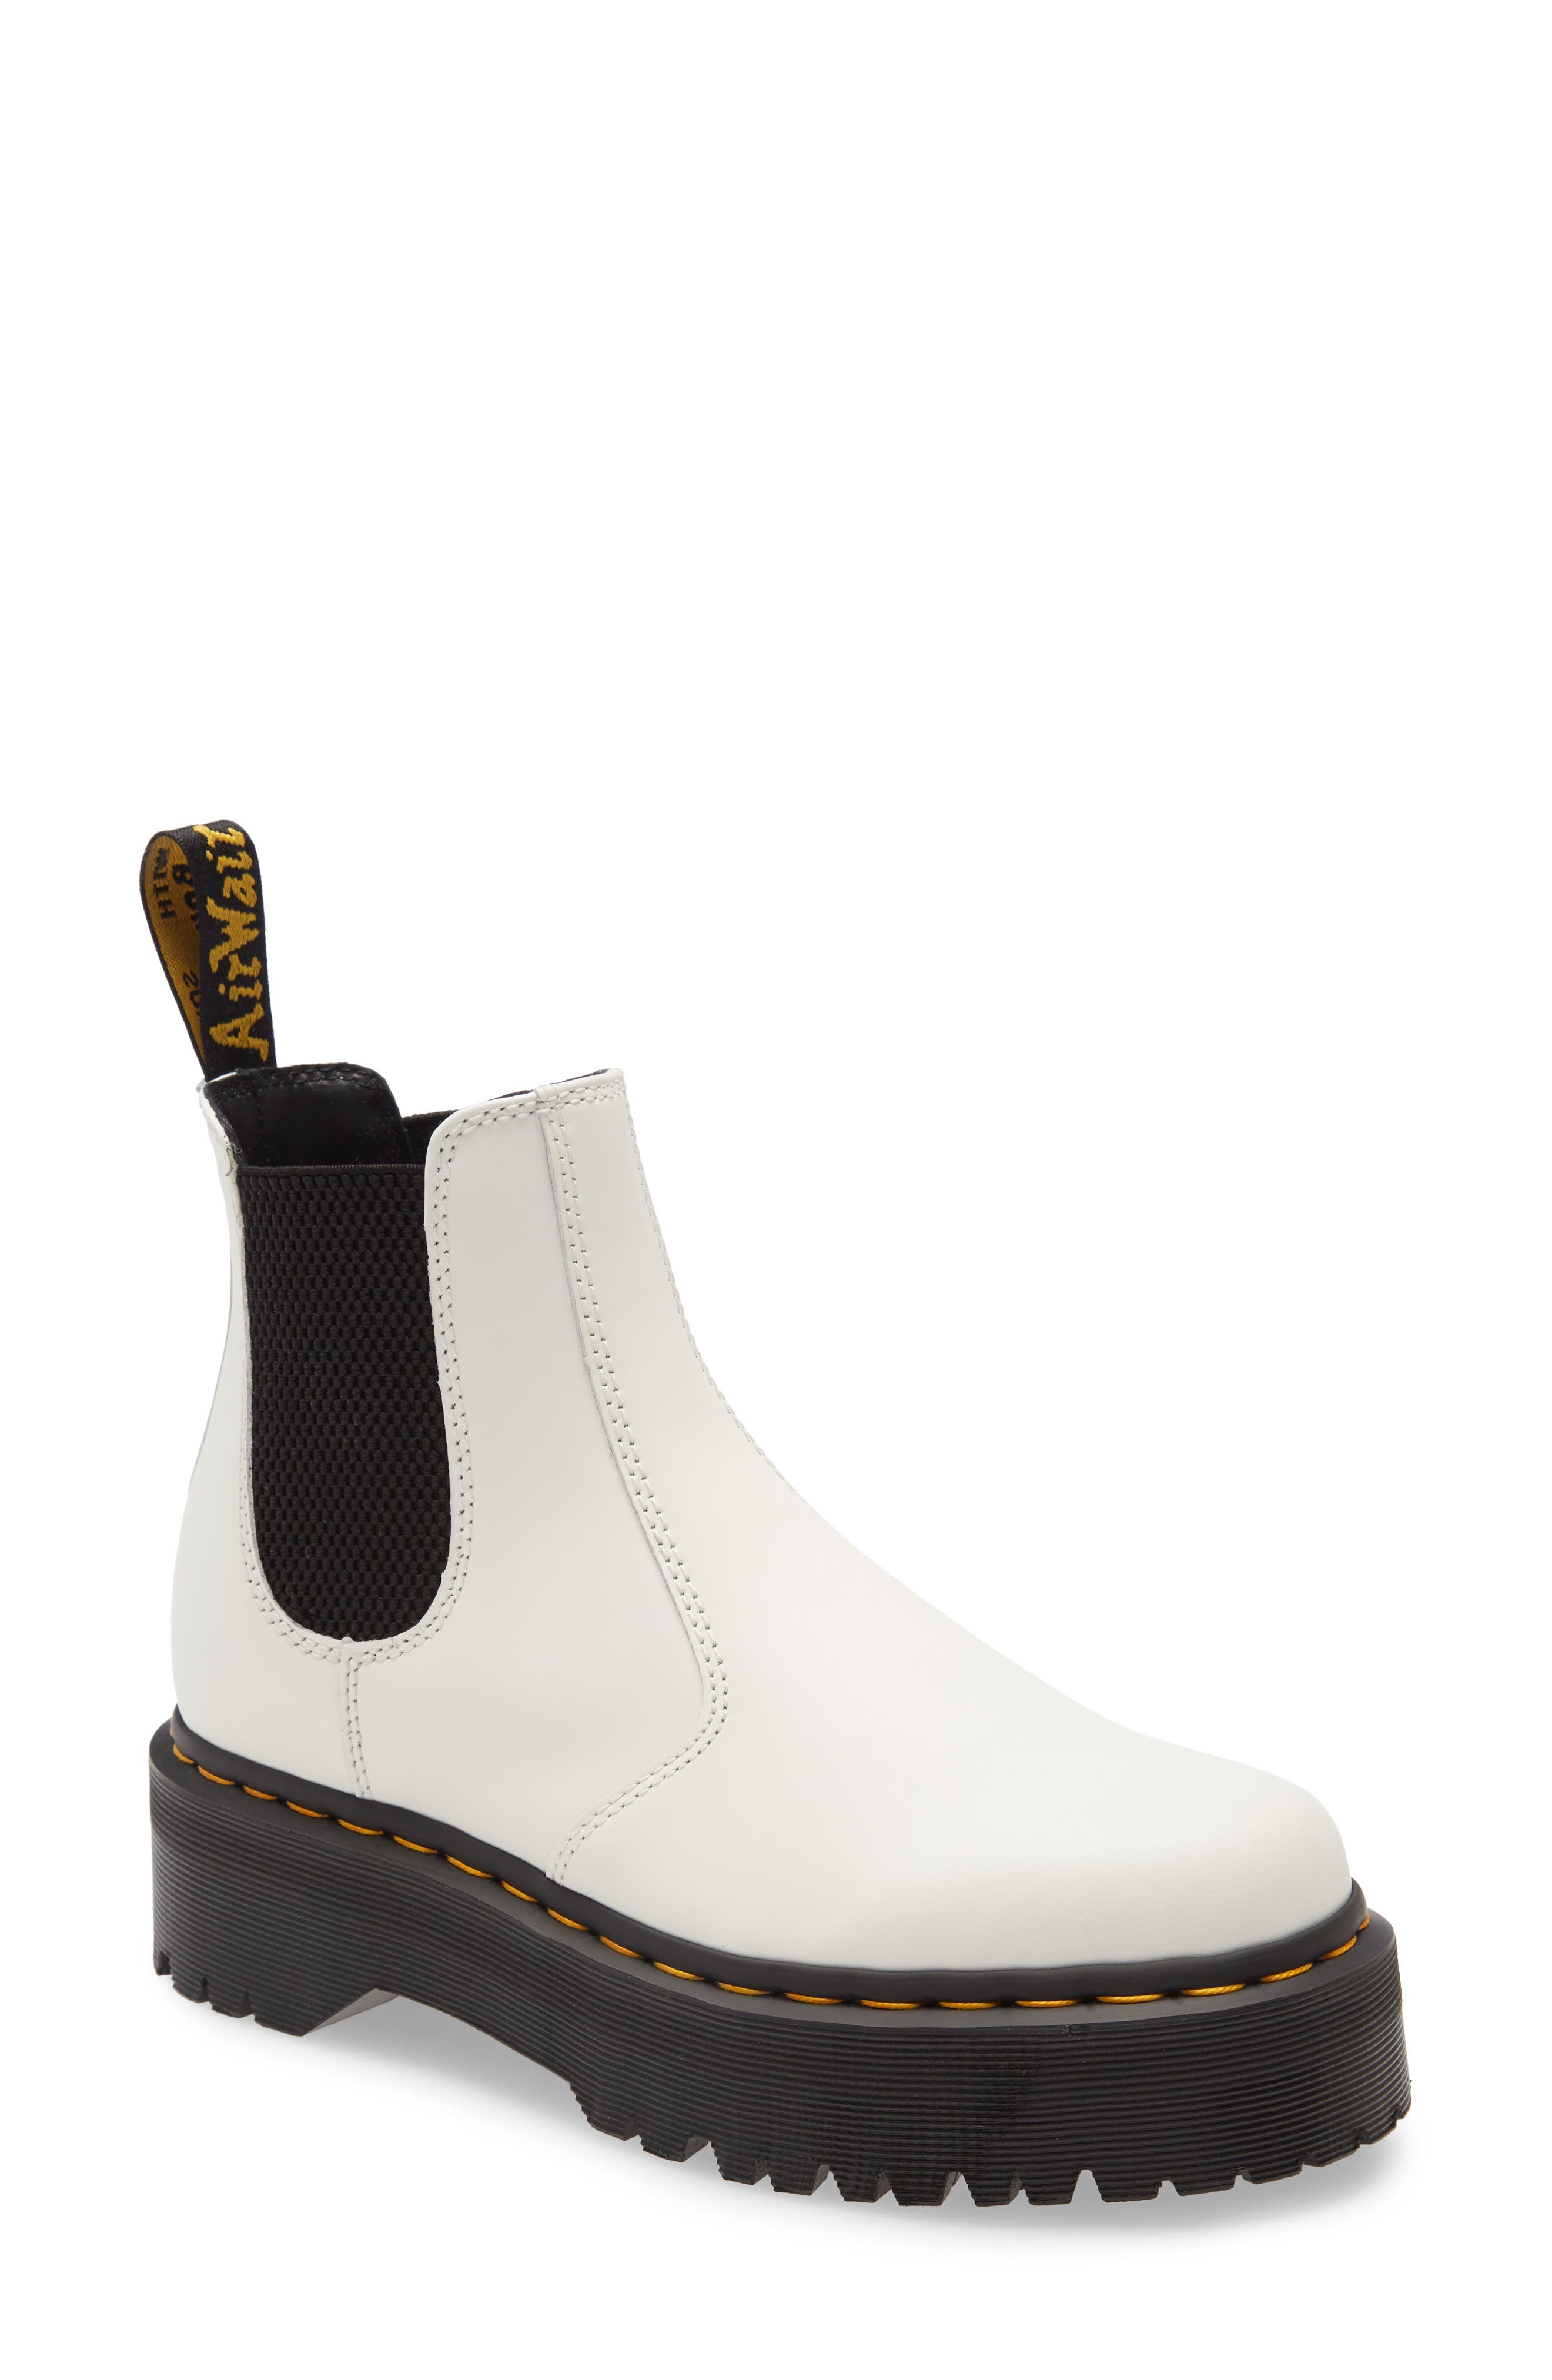 Dr. Martens 2976 Quad Platform Chelsea Boot in White Smooth Leather